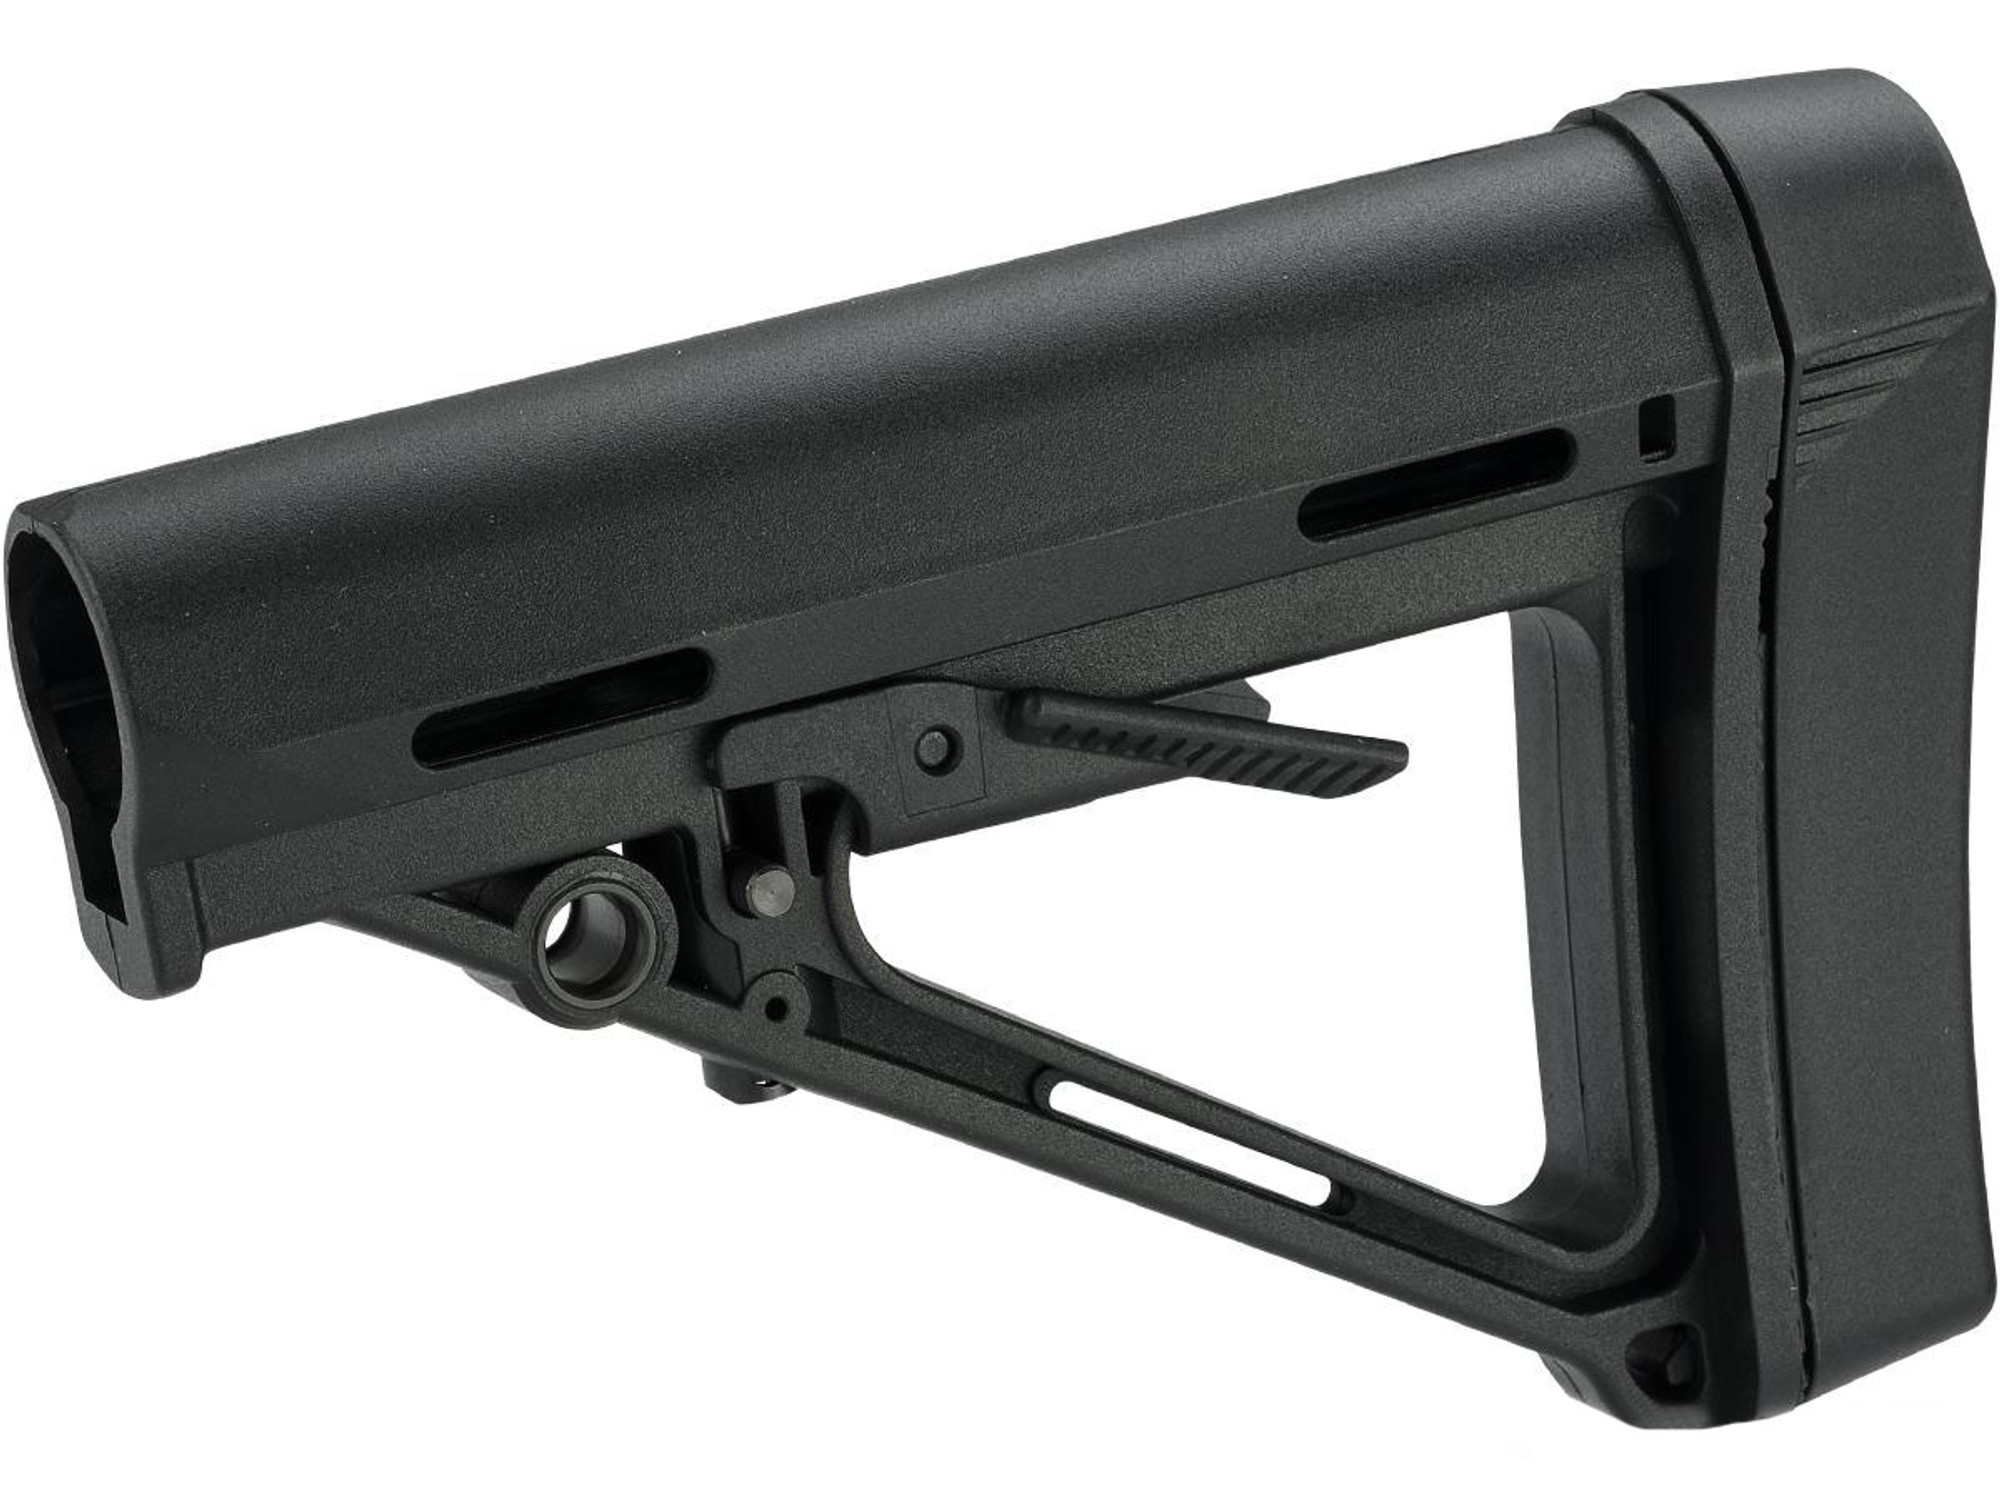 Bolt Airsoft BOM Stock with Heavy Duty Butt Pad (Color: Black)